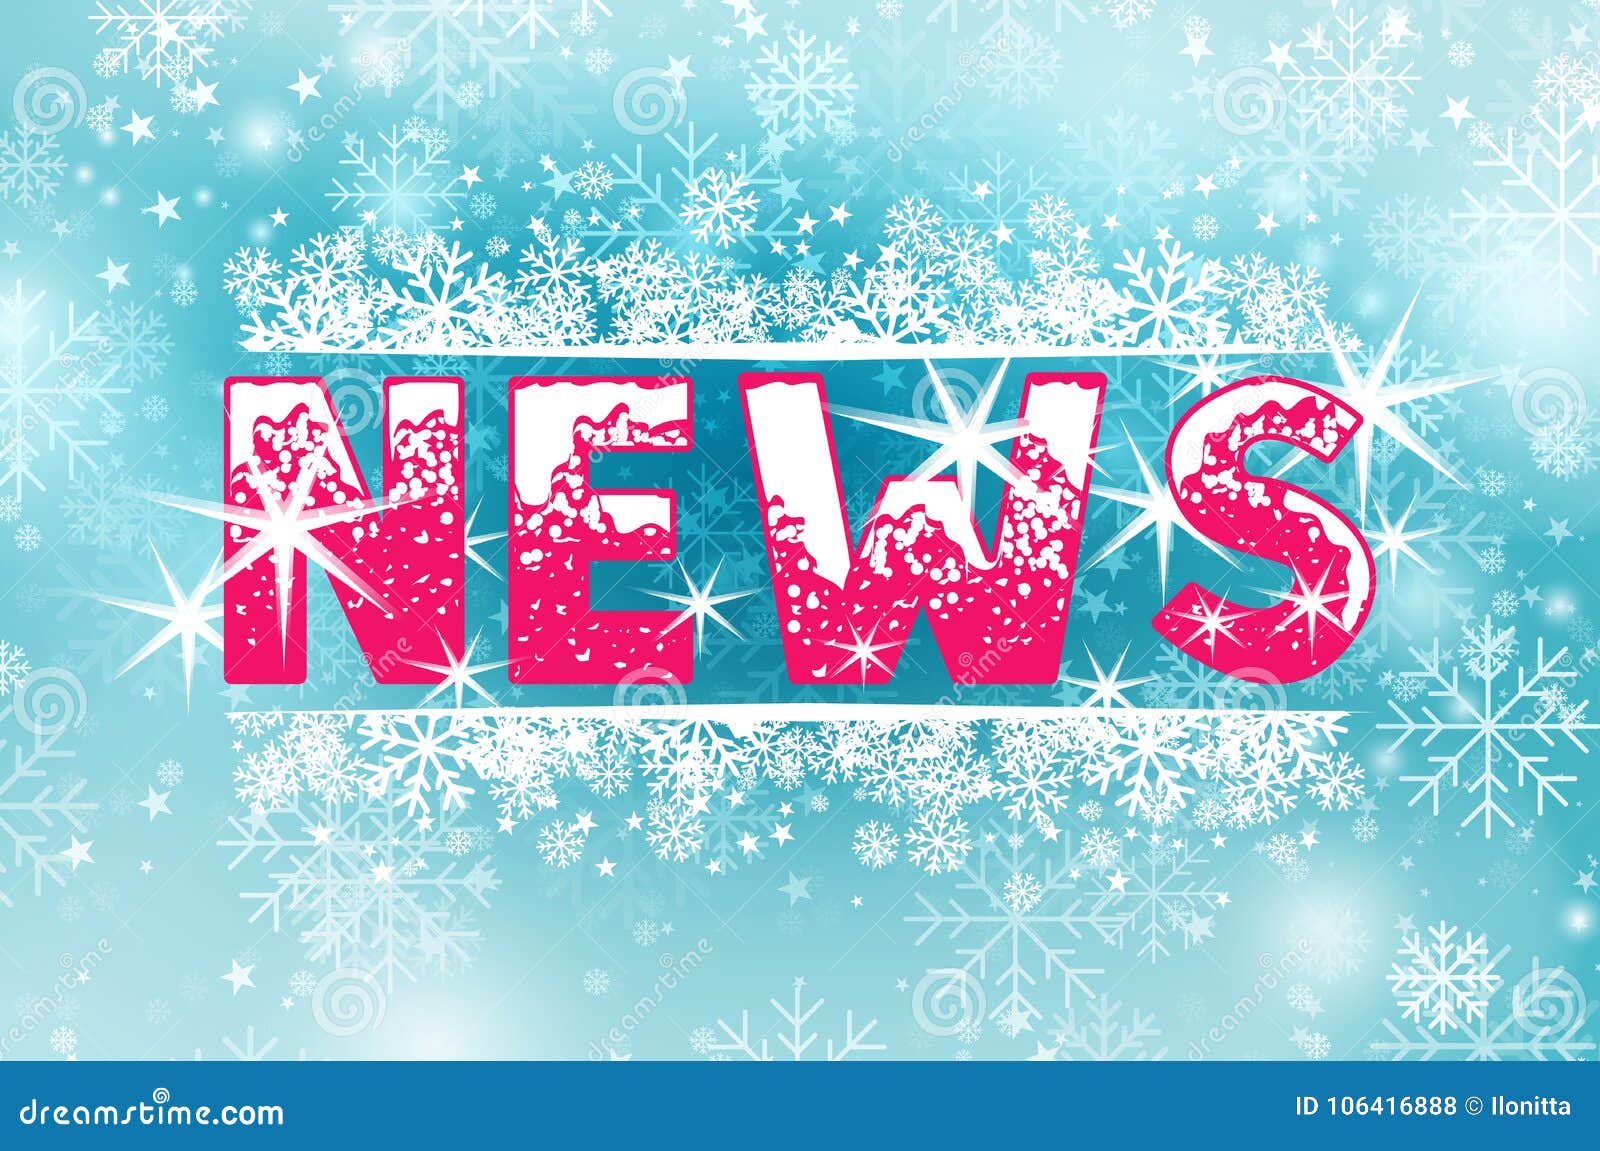 Get the latest news background Christmas from around the world